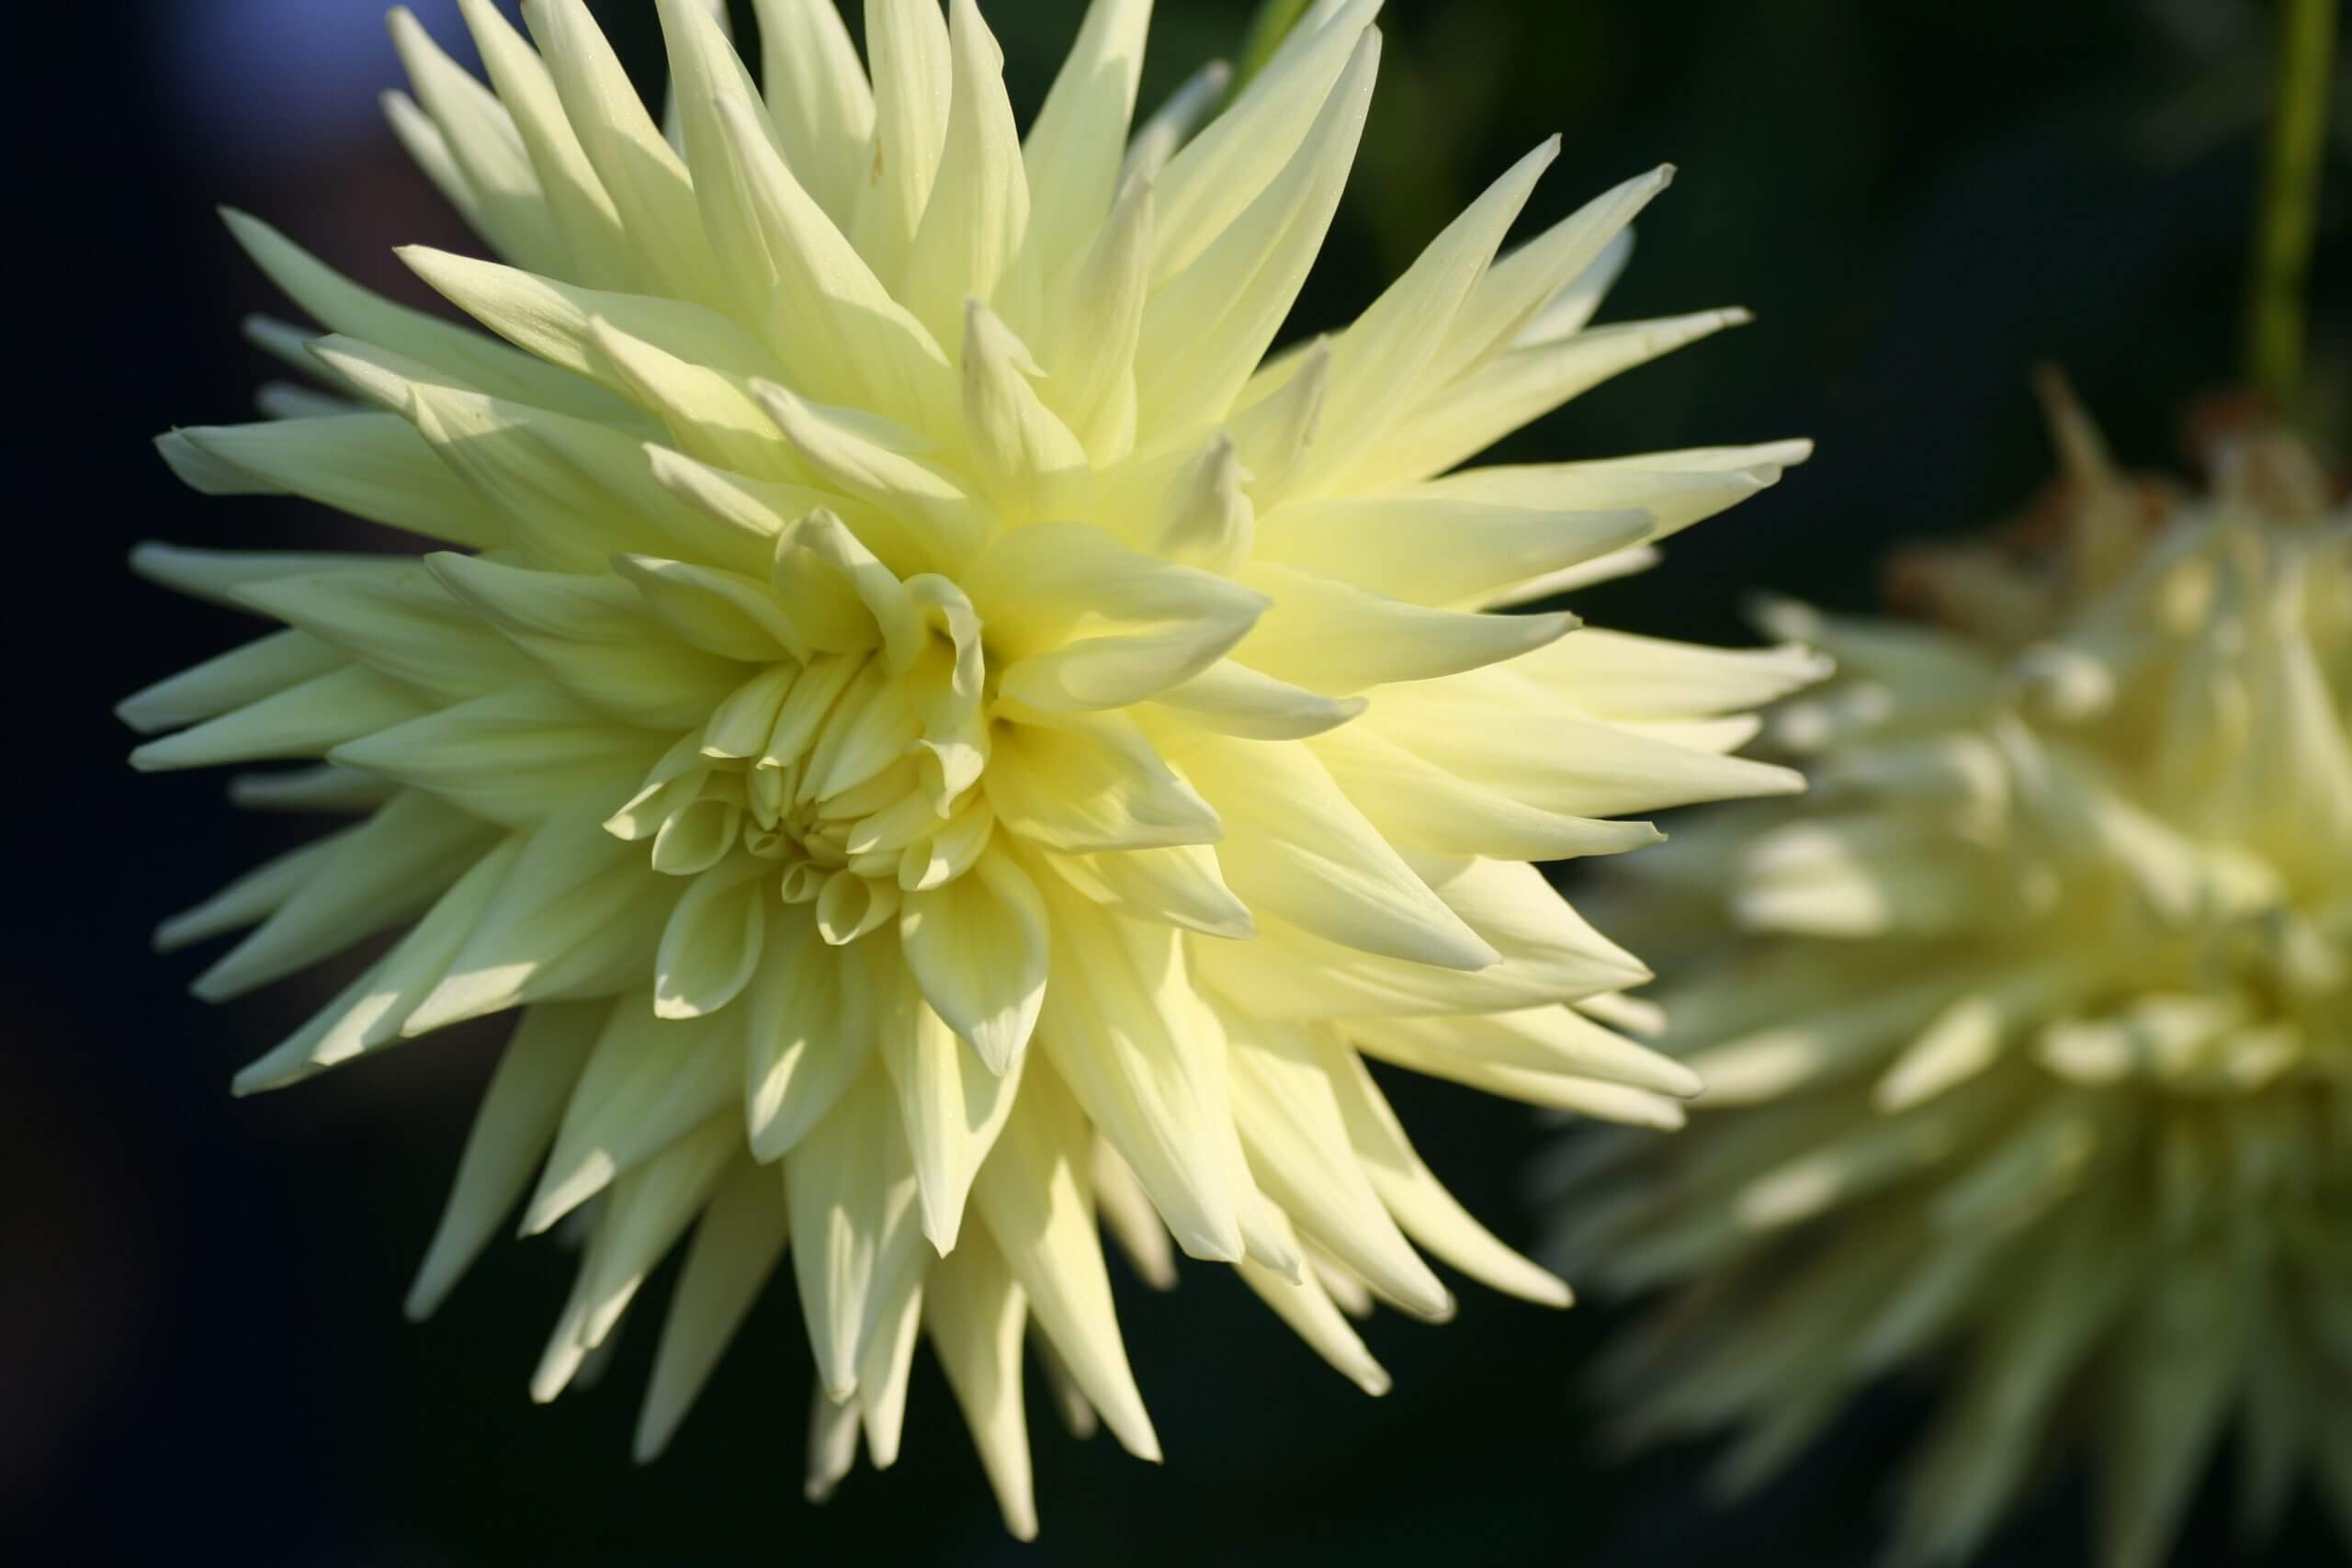 The primrose-yellow Dahlia ‘Aitara Majesty’ is a super giant with flowers that reach 12 inches across.